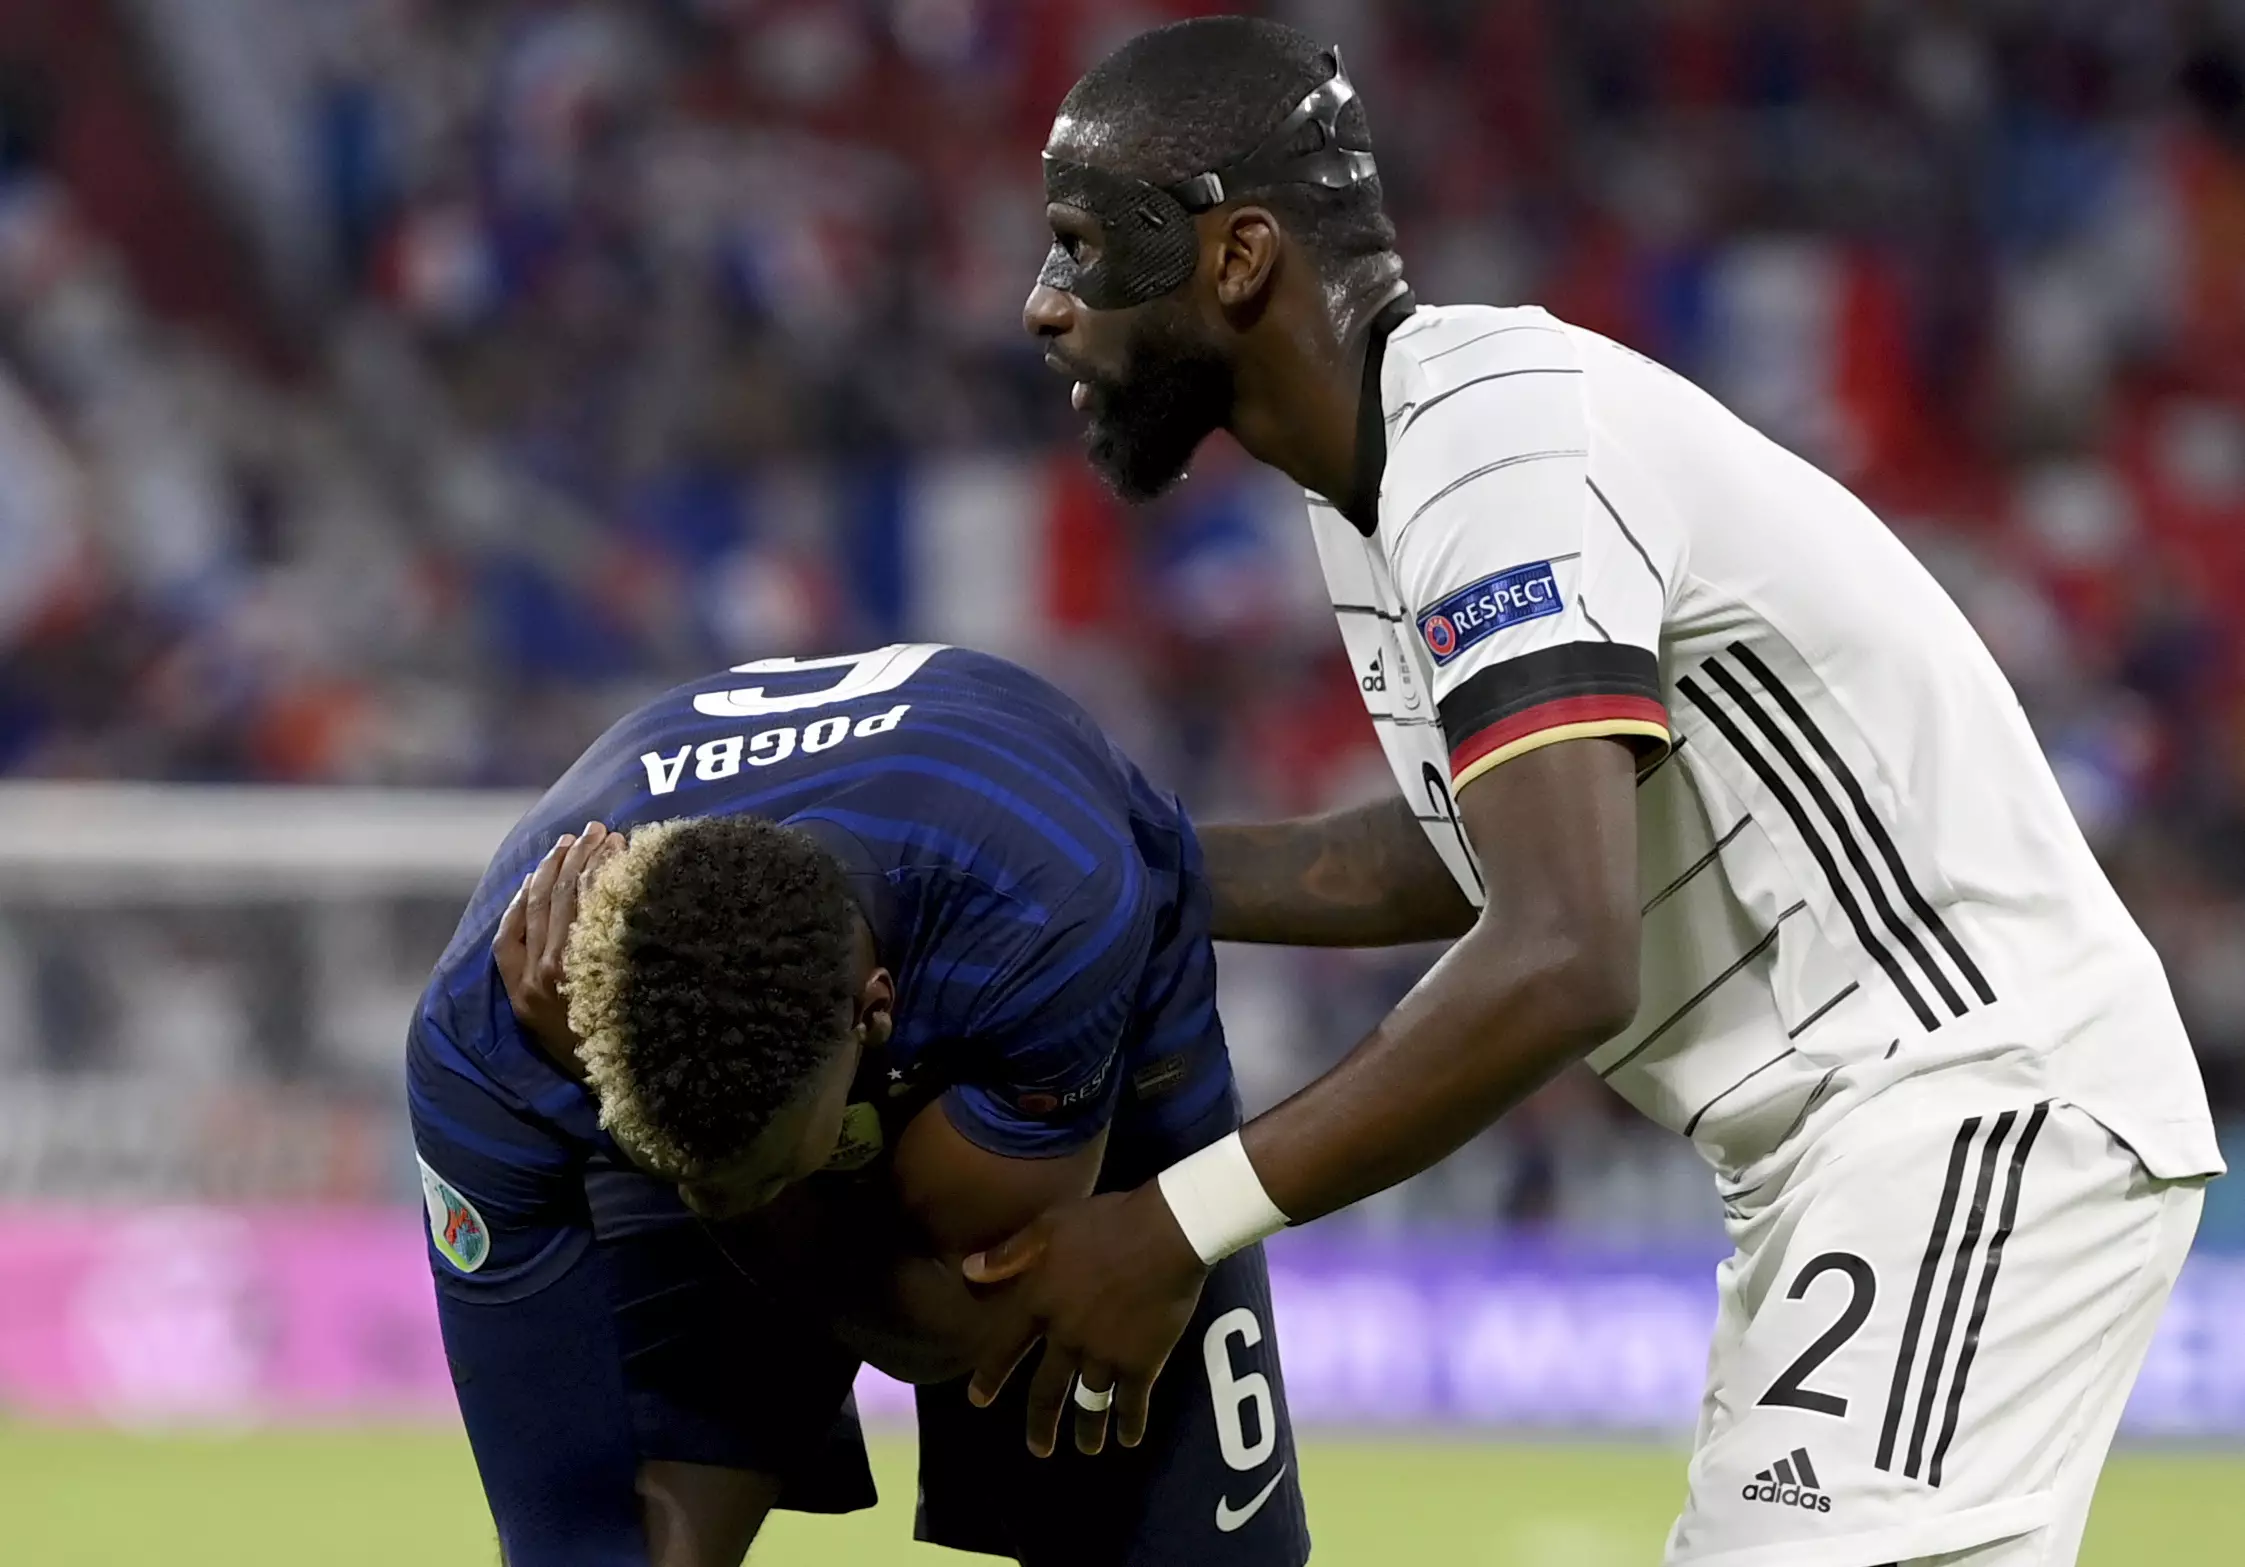 Pogba wasn't happy at the time though. Image: PA Images